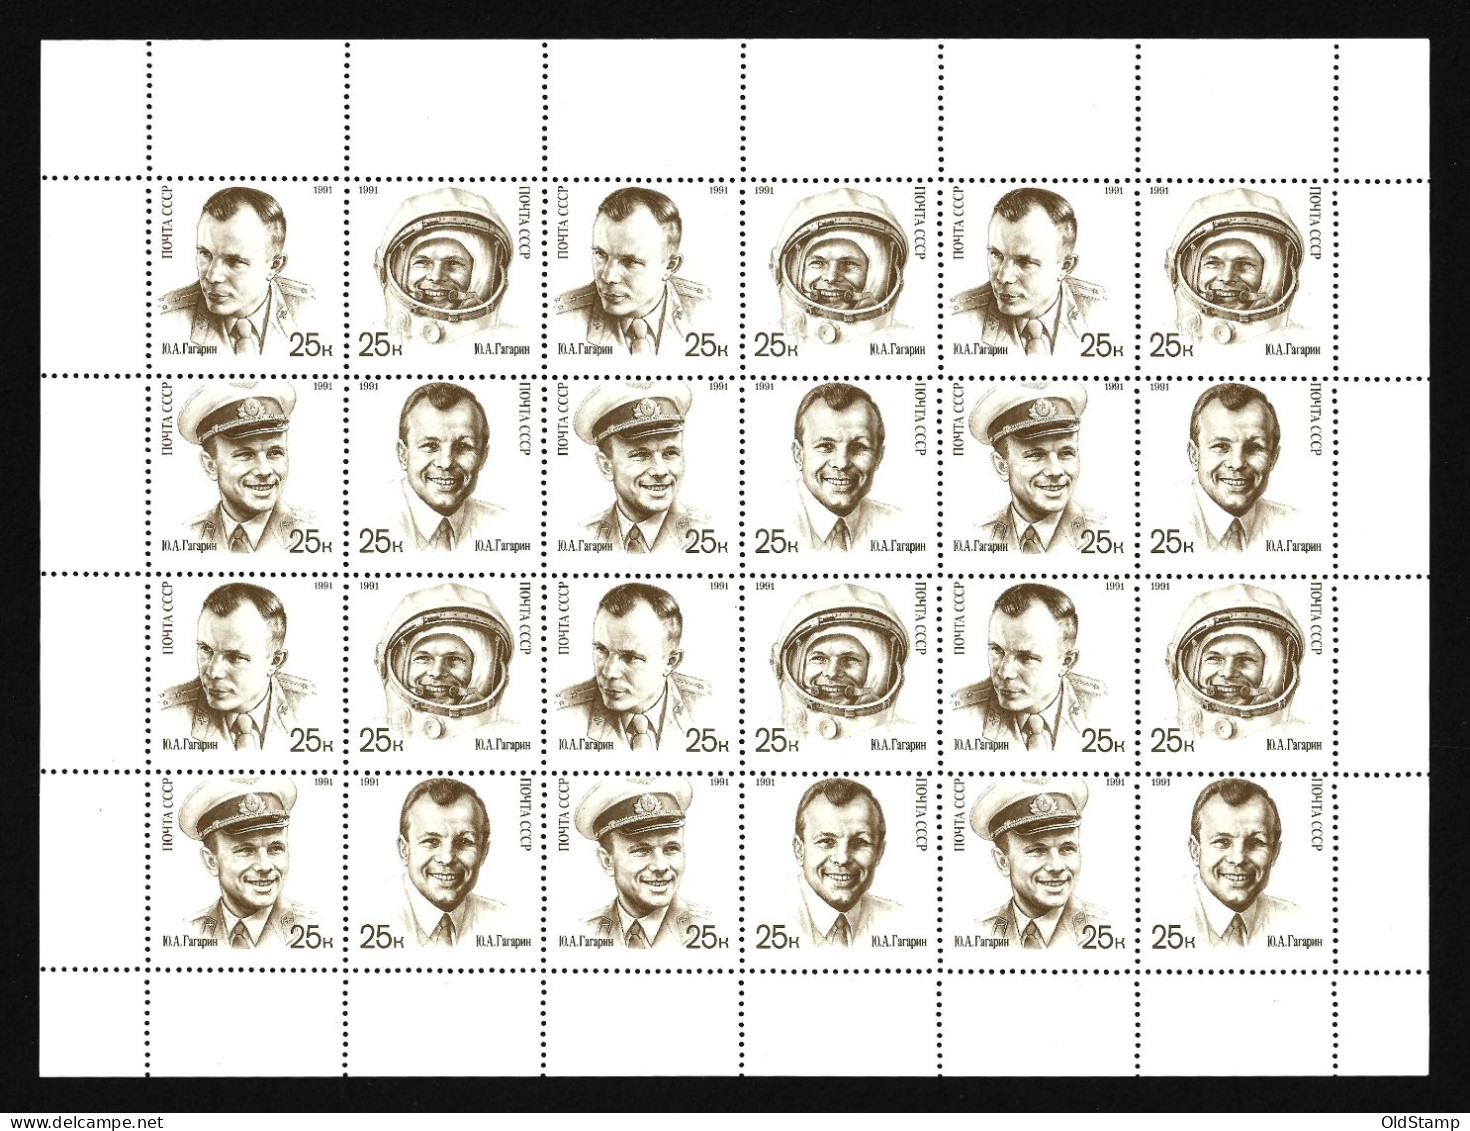 SPACE USSR Russia 1991 Full Sheet MNH Gagarin 30th Anniversary First Man In Space Cosmonautics Stamps Mi. 6185 - 6188 - Collections